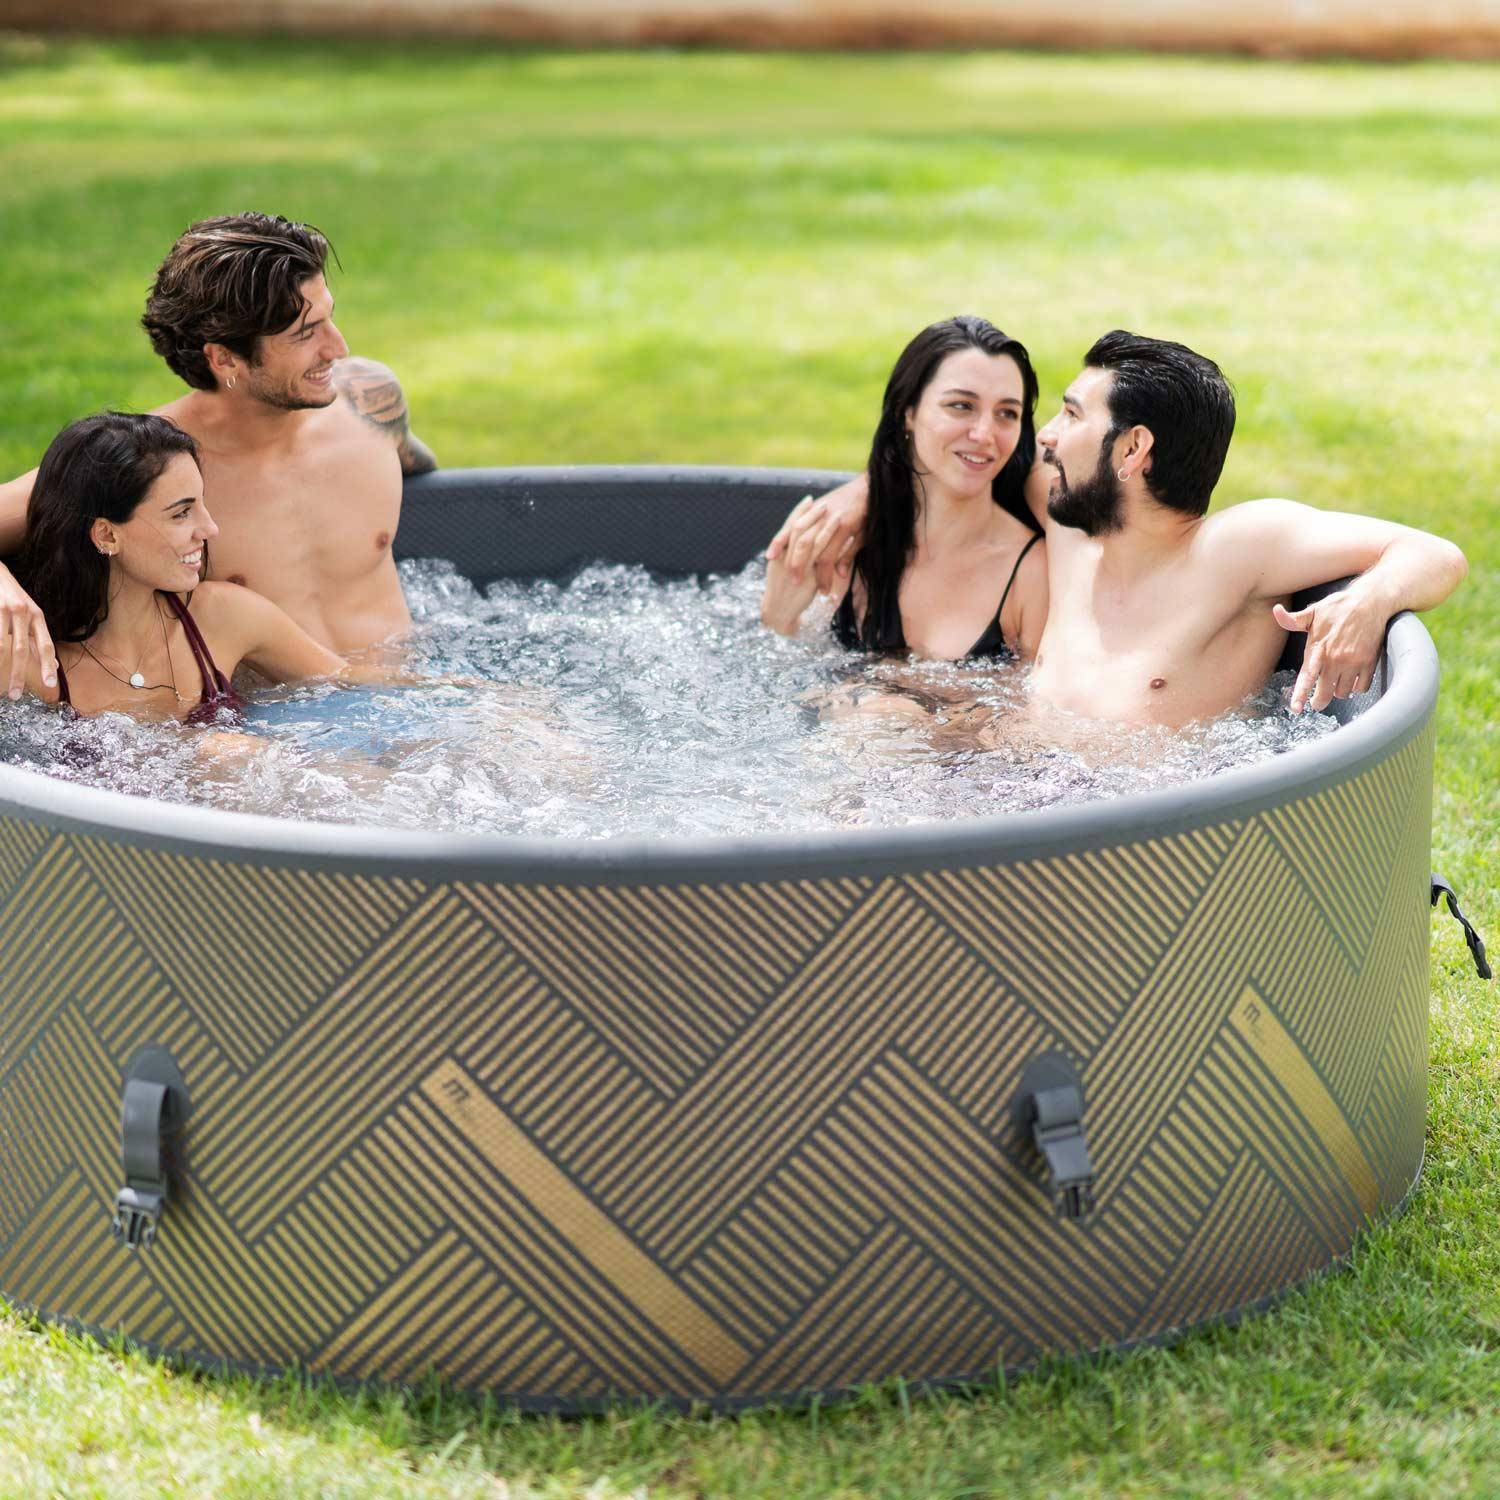  6-person premium round inflatable hot tub MSpa - Ø173cm round 6-person spa, reinforced PVC, pump, heating, filters, cover, floor mat - Mono 6 - Grey Photo2